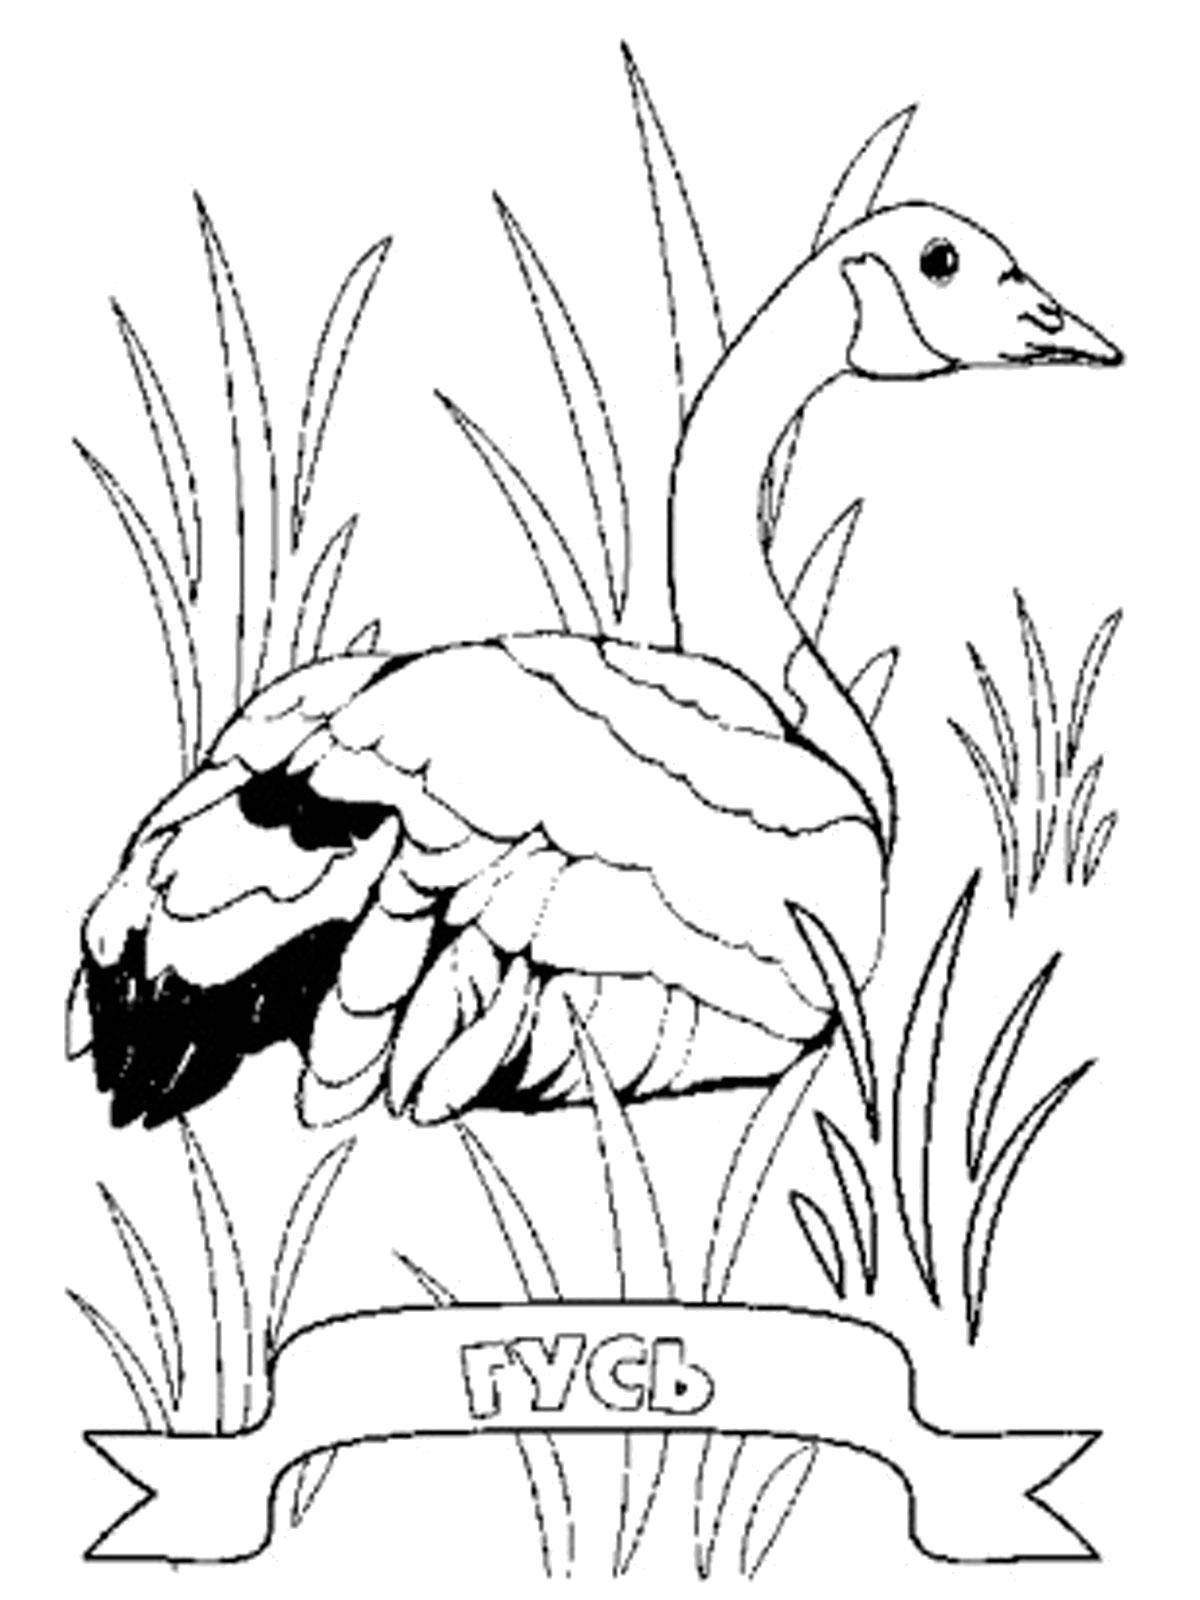 Coloring Goose in the grass. Category Pets allowed. Tags:  Birds, goose.